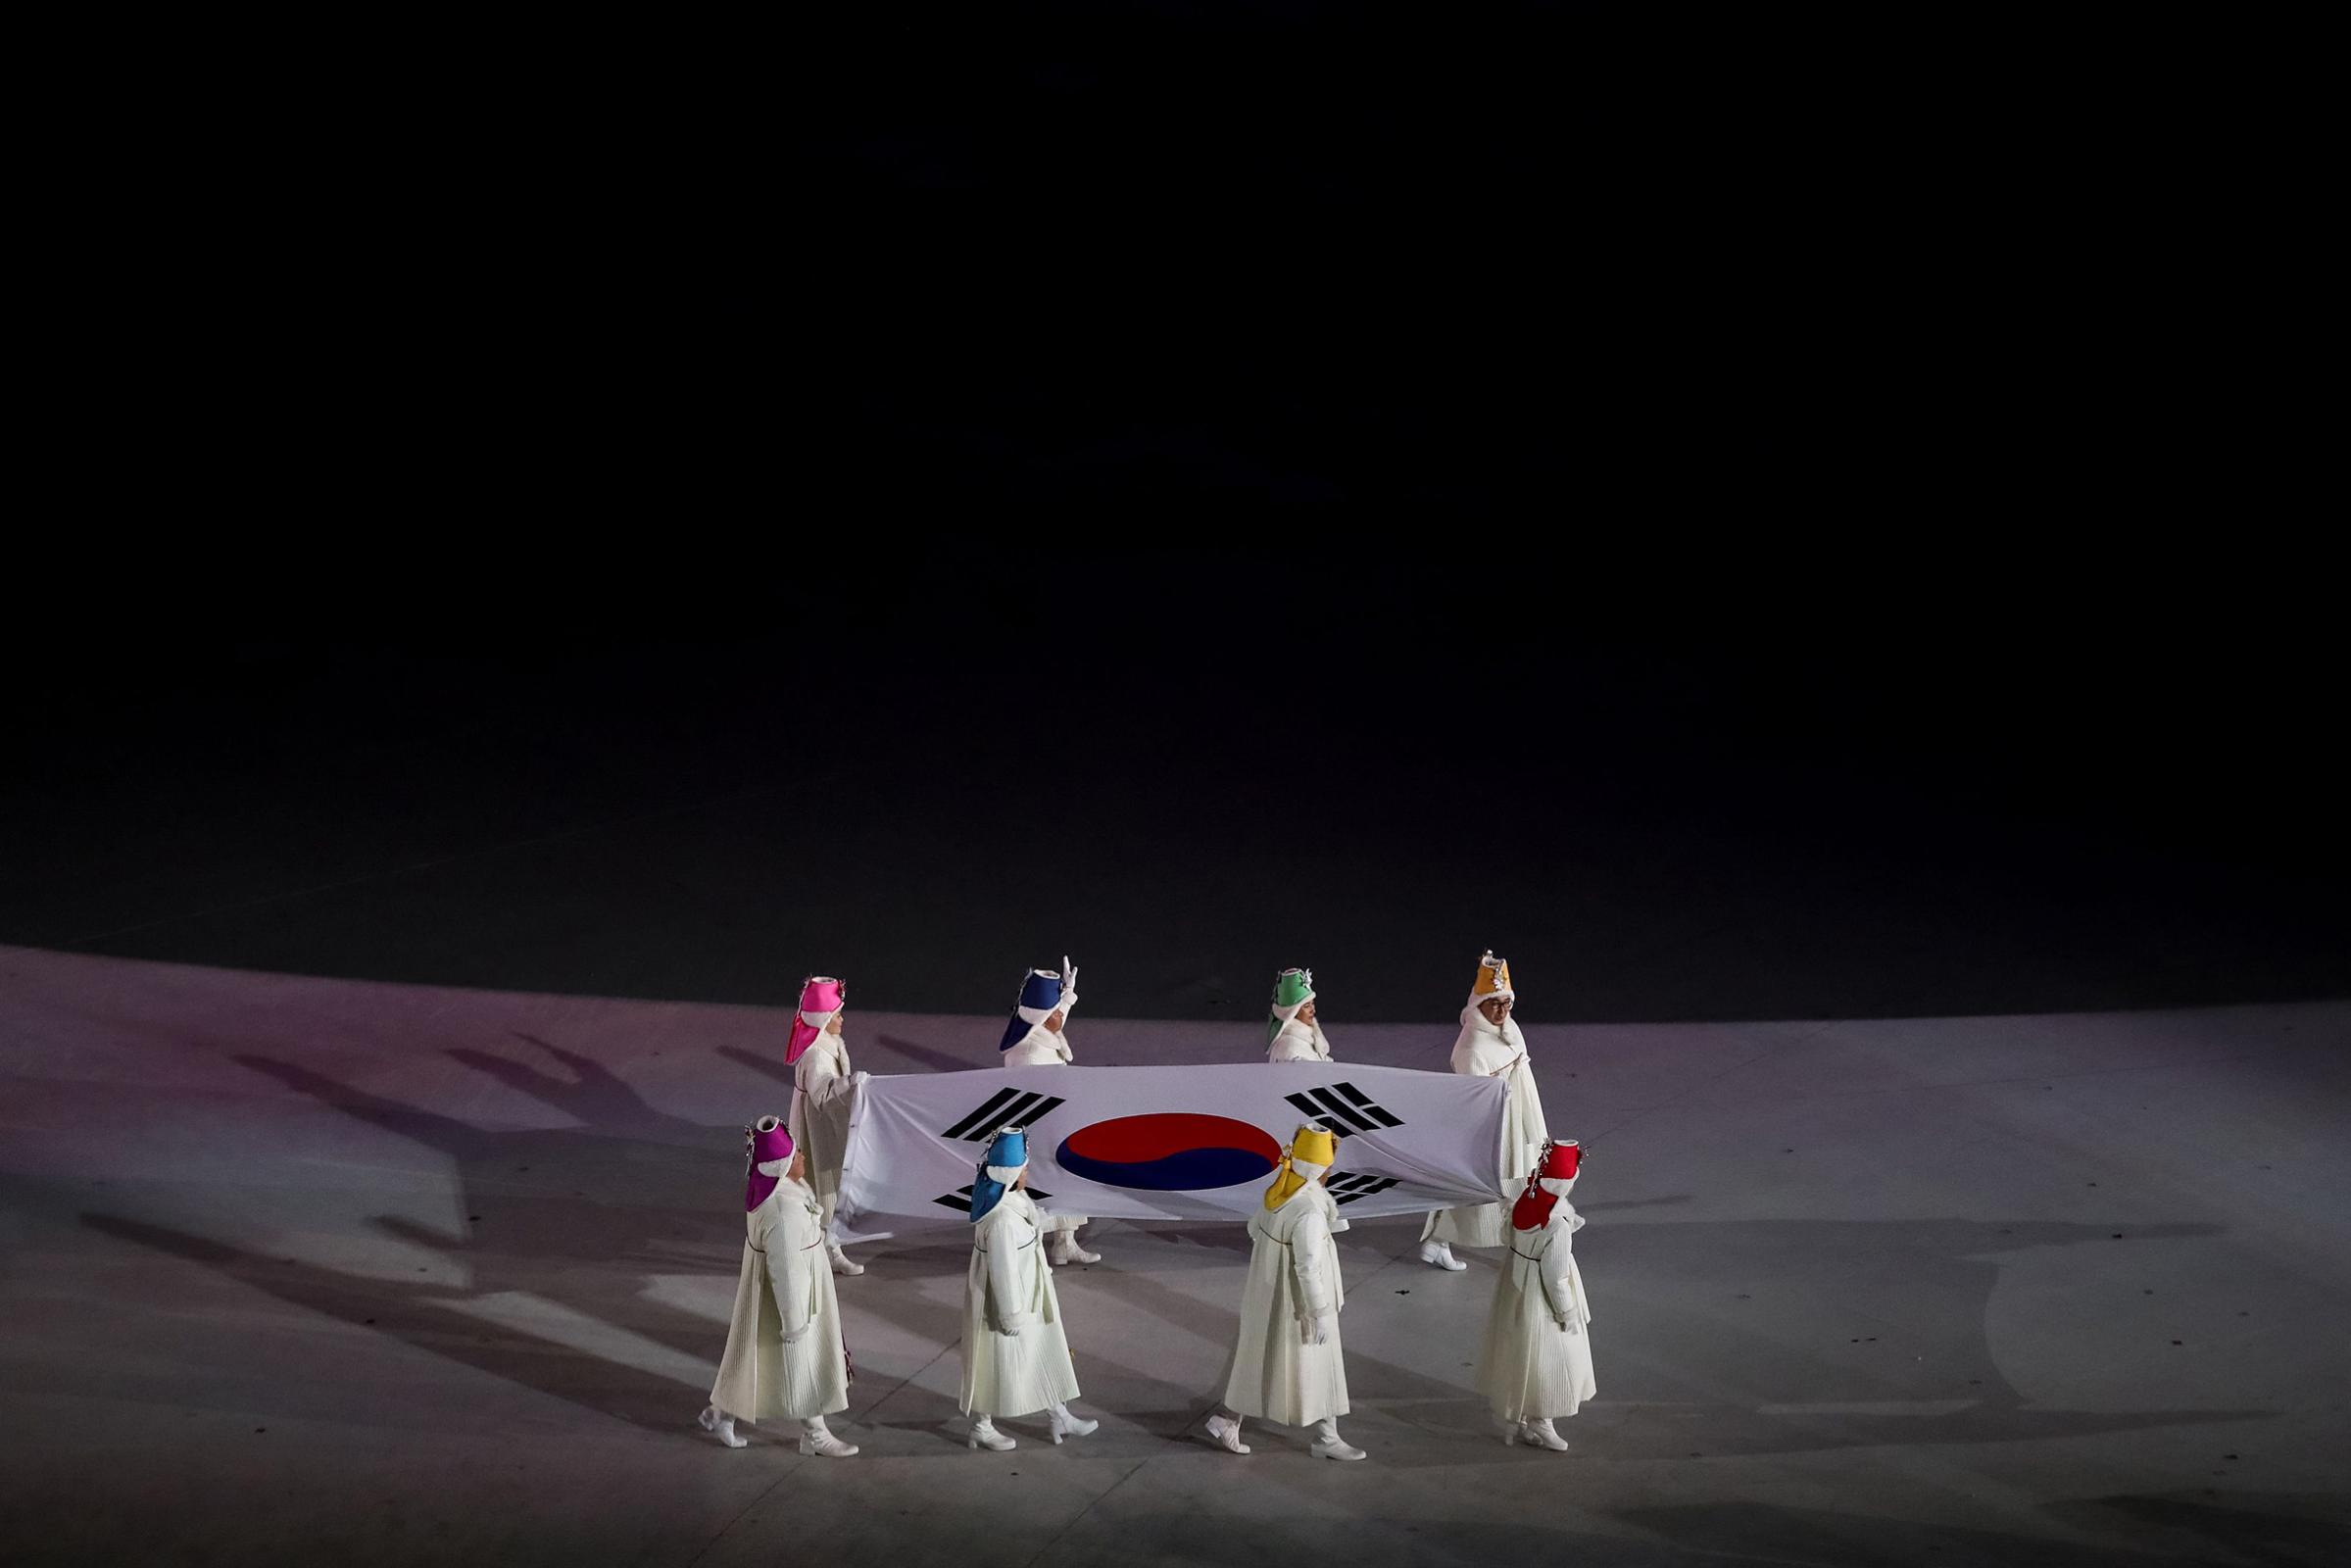 Former South Korean Olympians carry the South Korean flag during the opening ceremony of the Pyeongchang 2018 Winter Olympic Games.